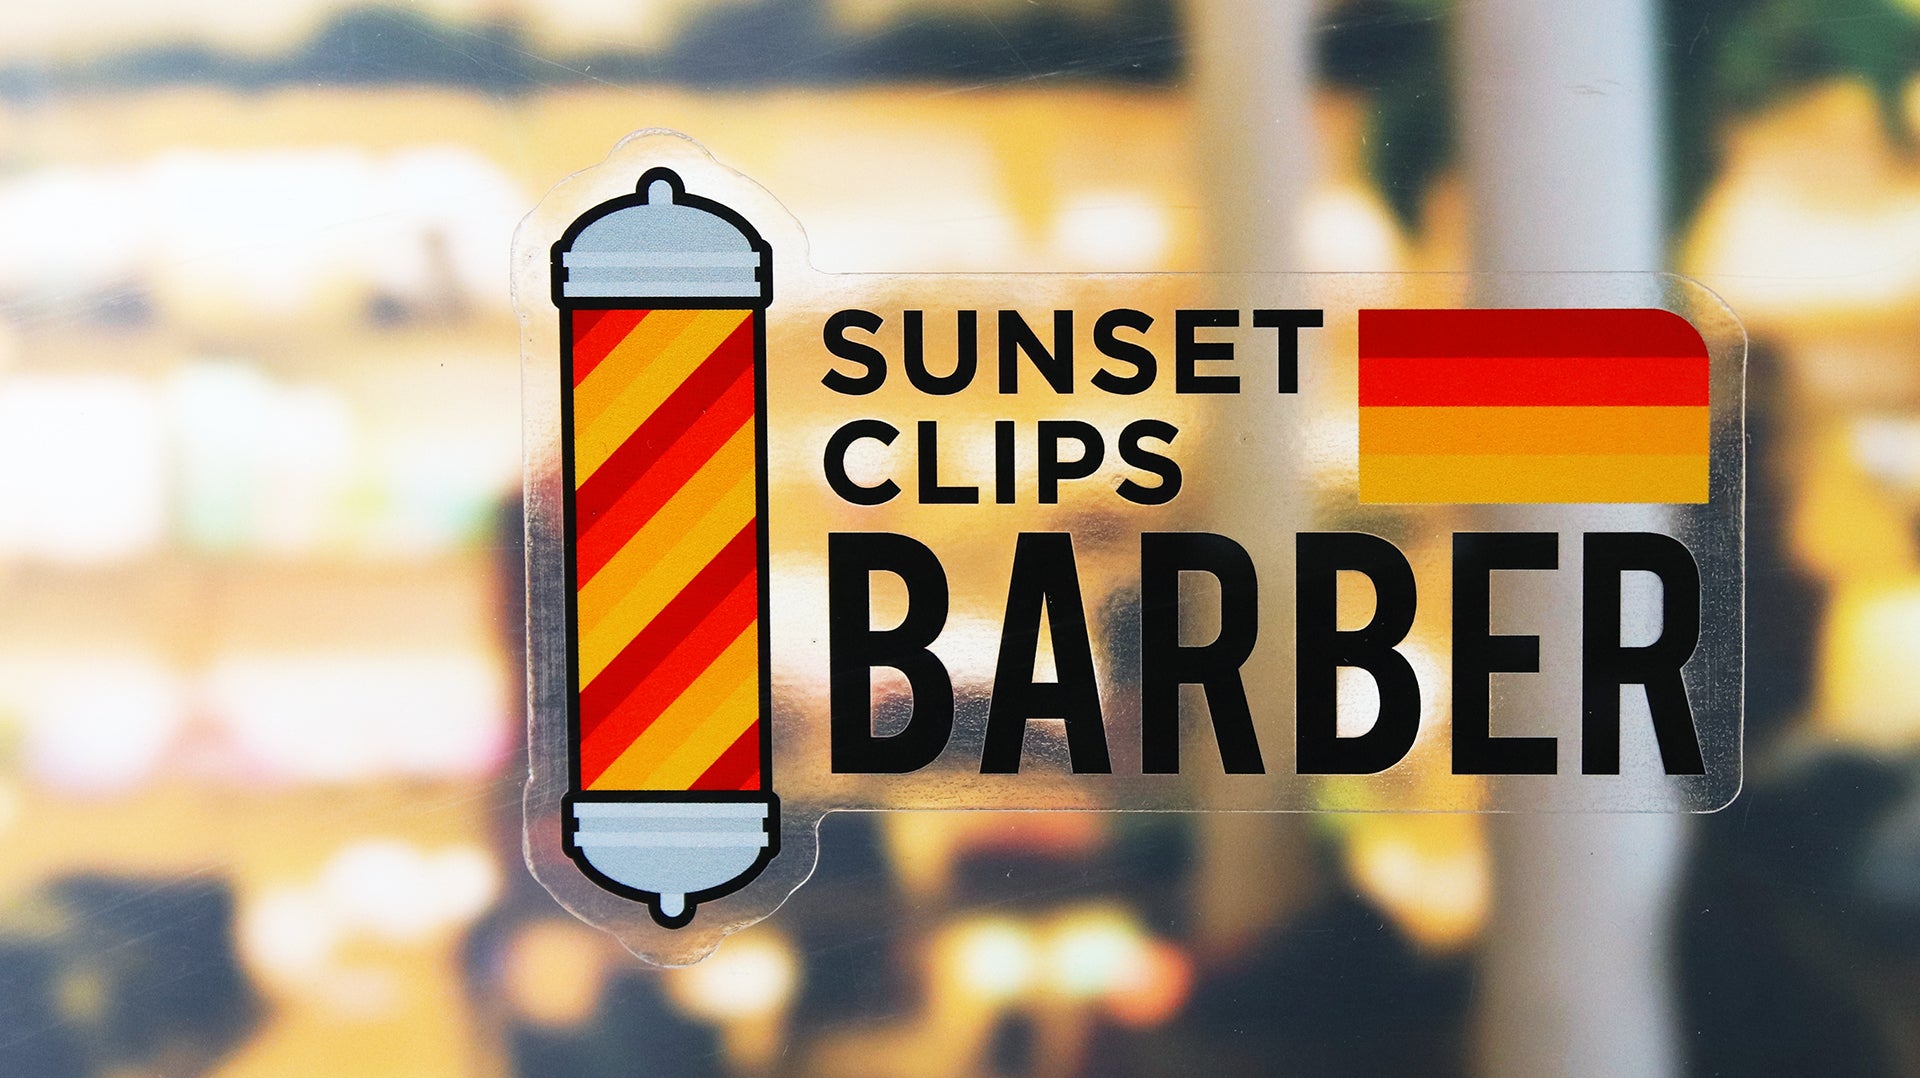 Eco-friendly front adhesive die-cut sticker with sunset clips barber logo applied to a window